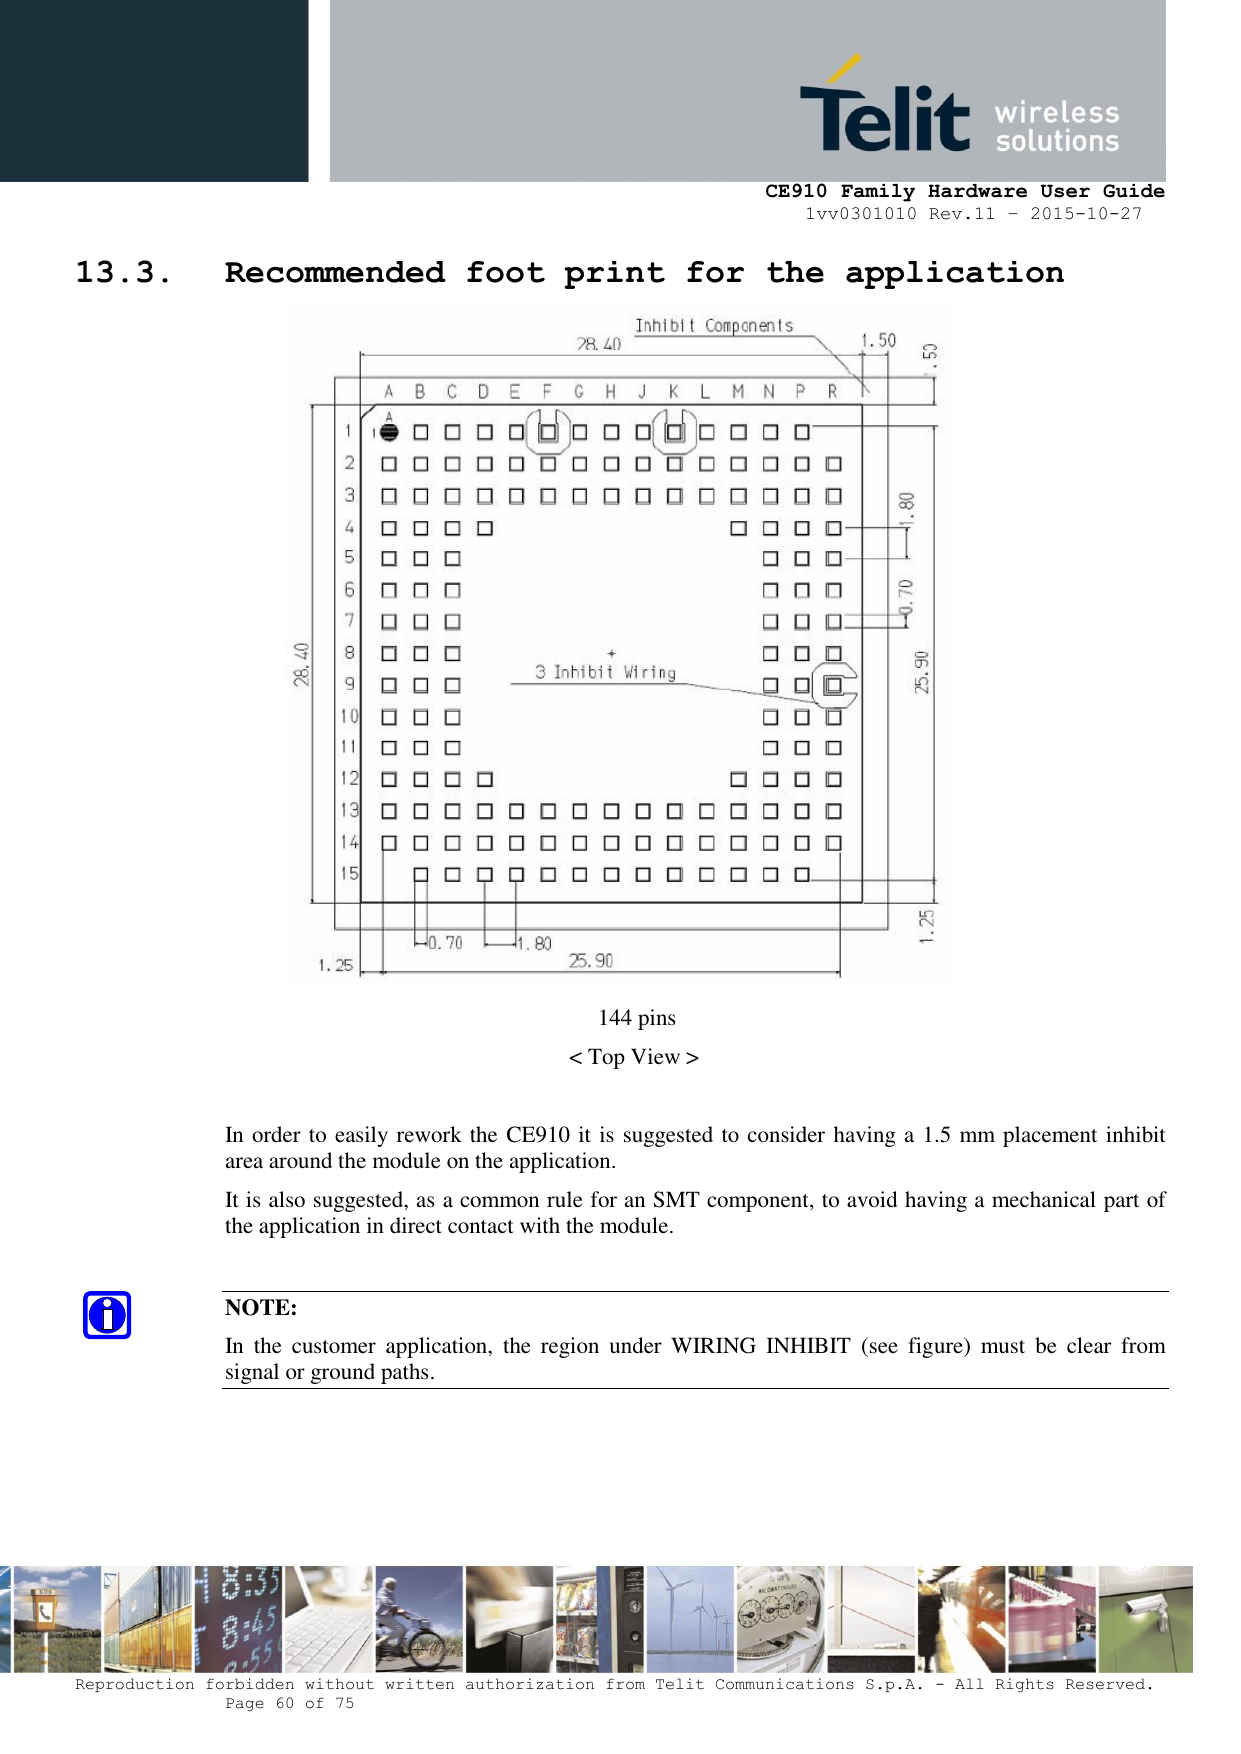     CE910 Family Hardware User Guide 1vv0301010 Rev.11 – 2015-10-27 Reproduction forbidden without written authorization from Telit Communications S.p.A. - All Rights Reserved.    Page 60 of 75                                                     13.3. Recommended foot print for the application  144 pins &lt; Top View &gt;  In order to easily rework the CE910 it is suggested to consider having a 1.5 mm placement inhibit area around the module on the application.  It is also suggested, as a common rule for an SMT component, to avoid having a mechanical part of the application in direct contact with the module.  NOTE: In  the  customer  application,  the  region  under  WIRING  INHIBIT  (see  figure)  must  be  clear  from signal or ground paths.   